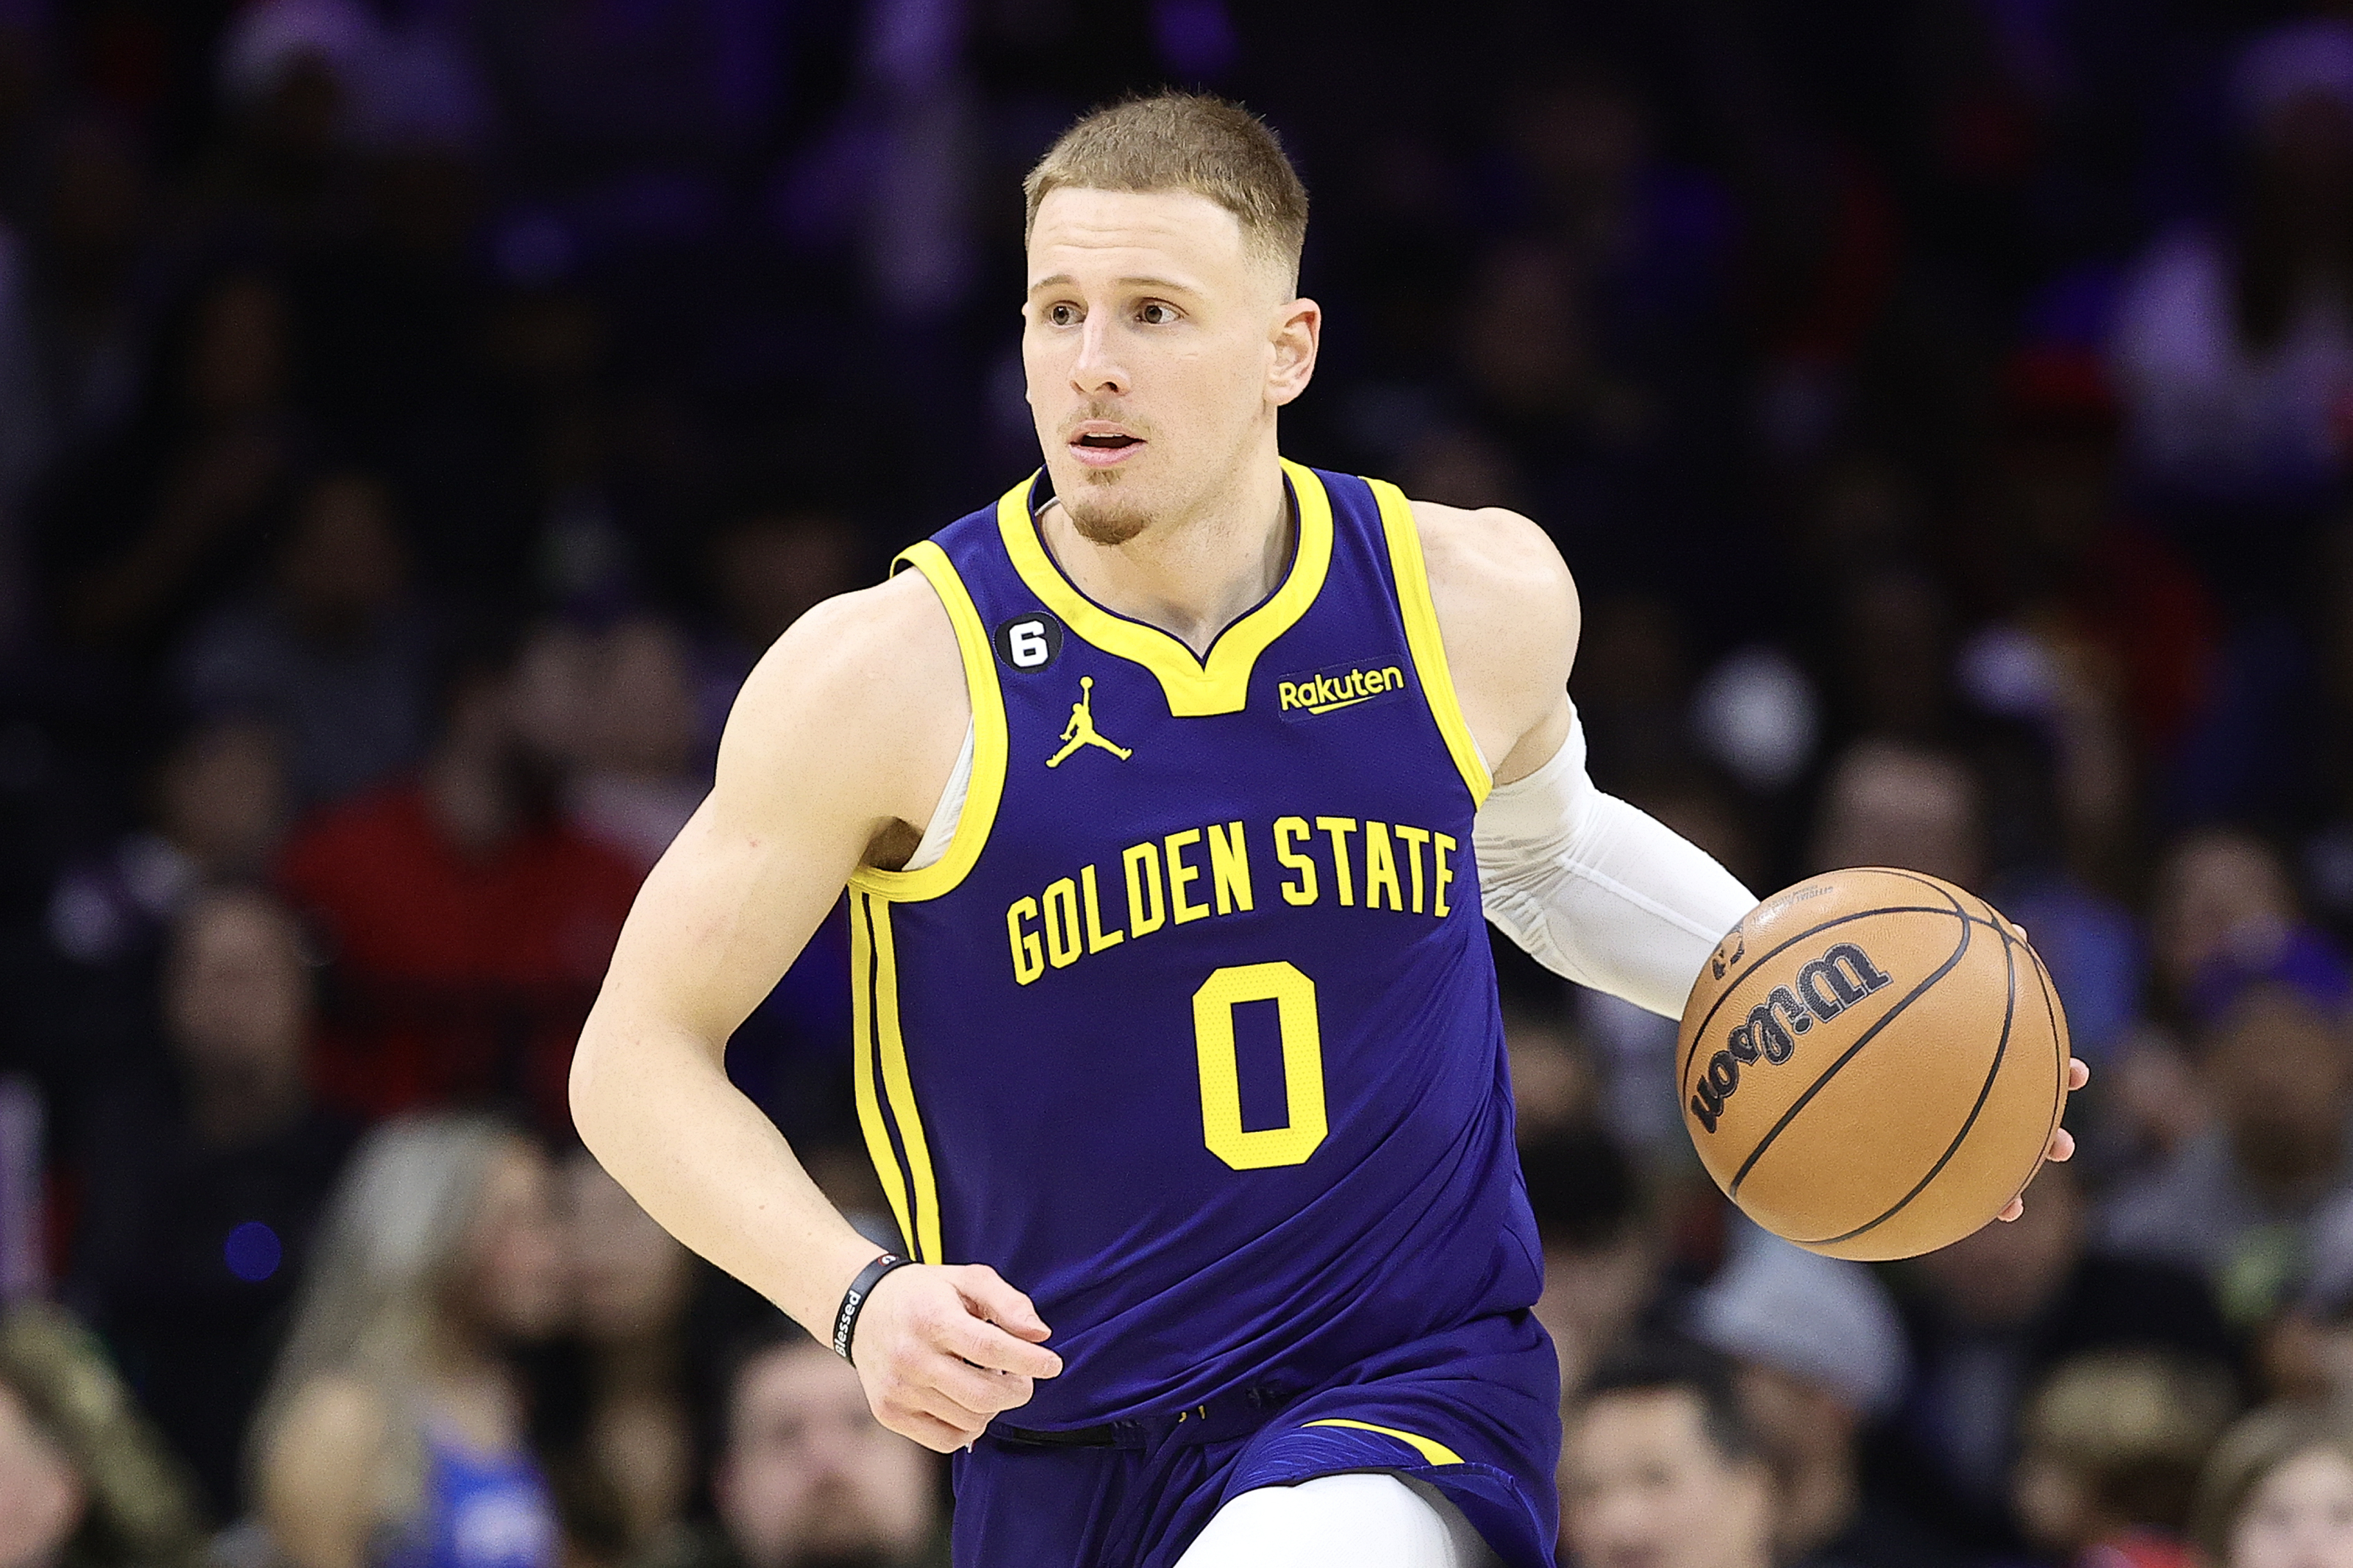 A guide to Donte DiVincenzo's nicknames - Golden State Of Mind